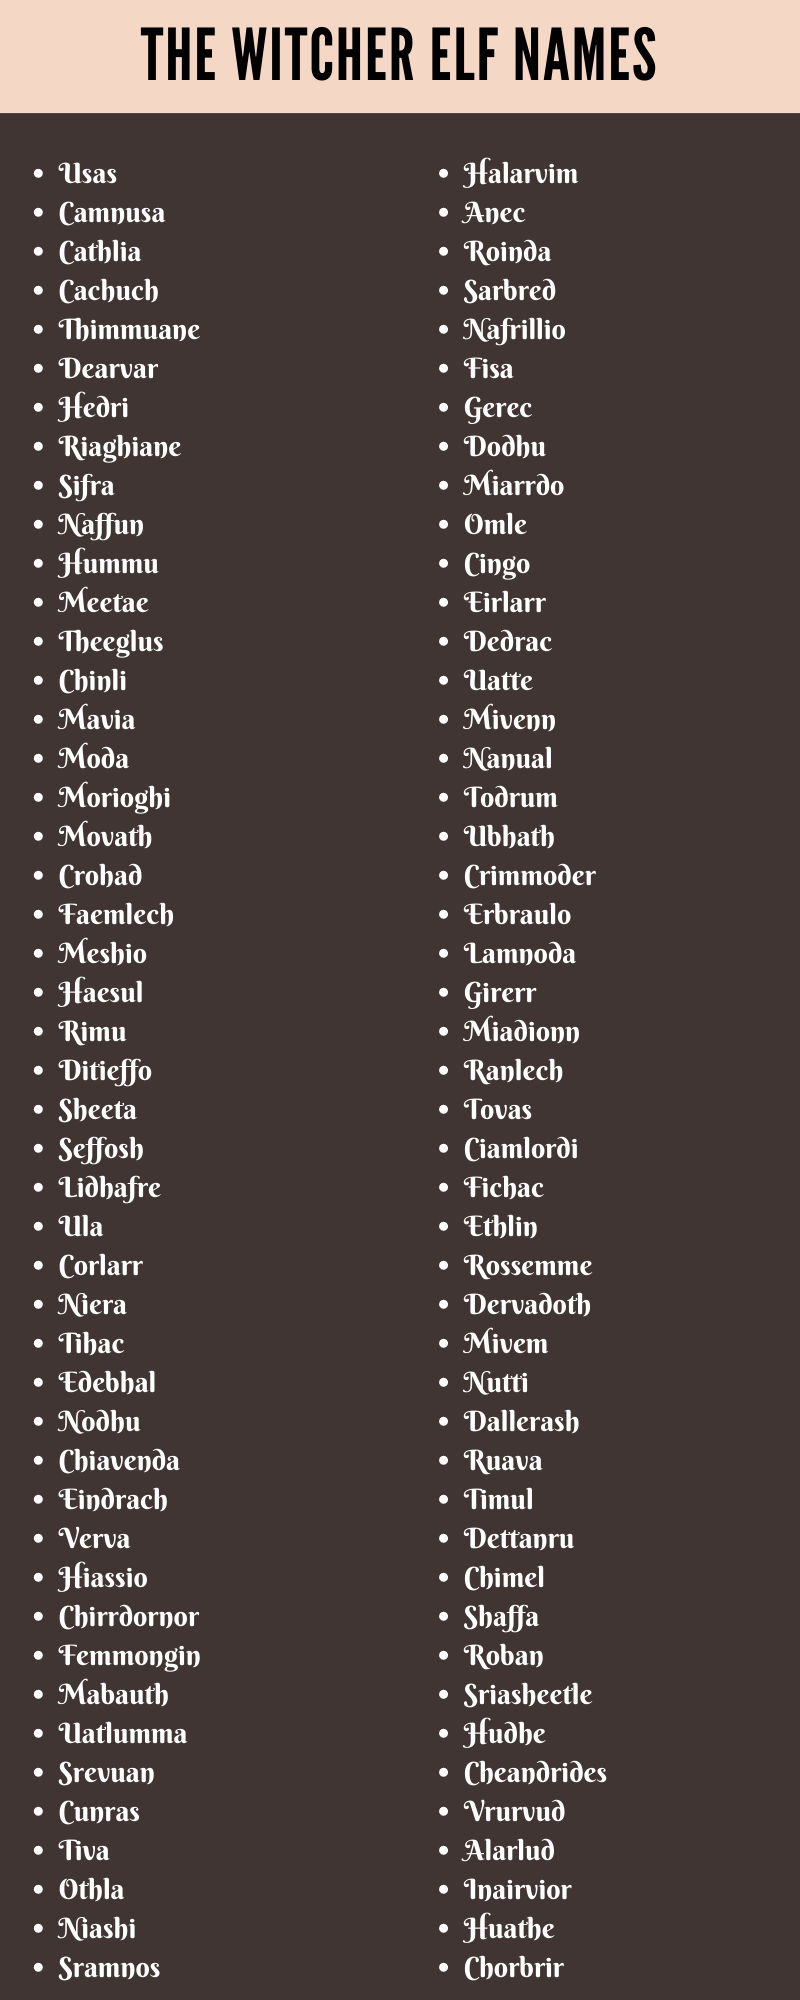 The Witcher Elf Names